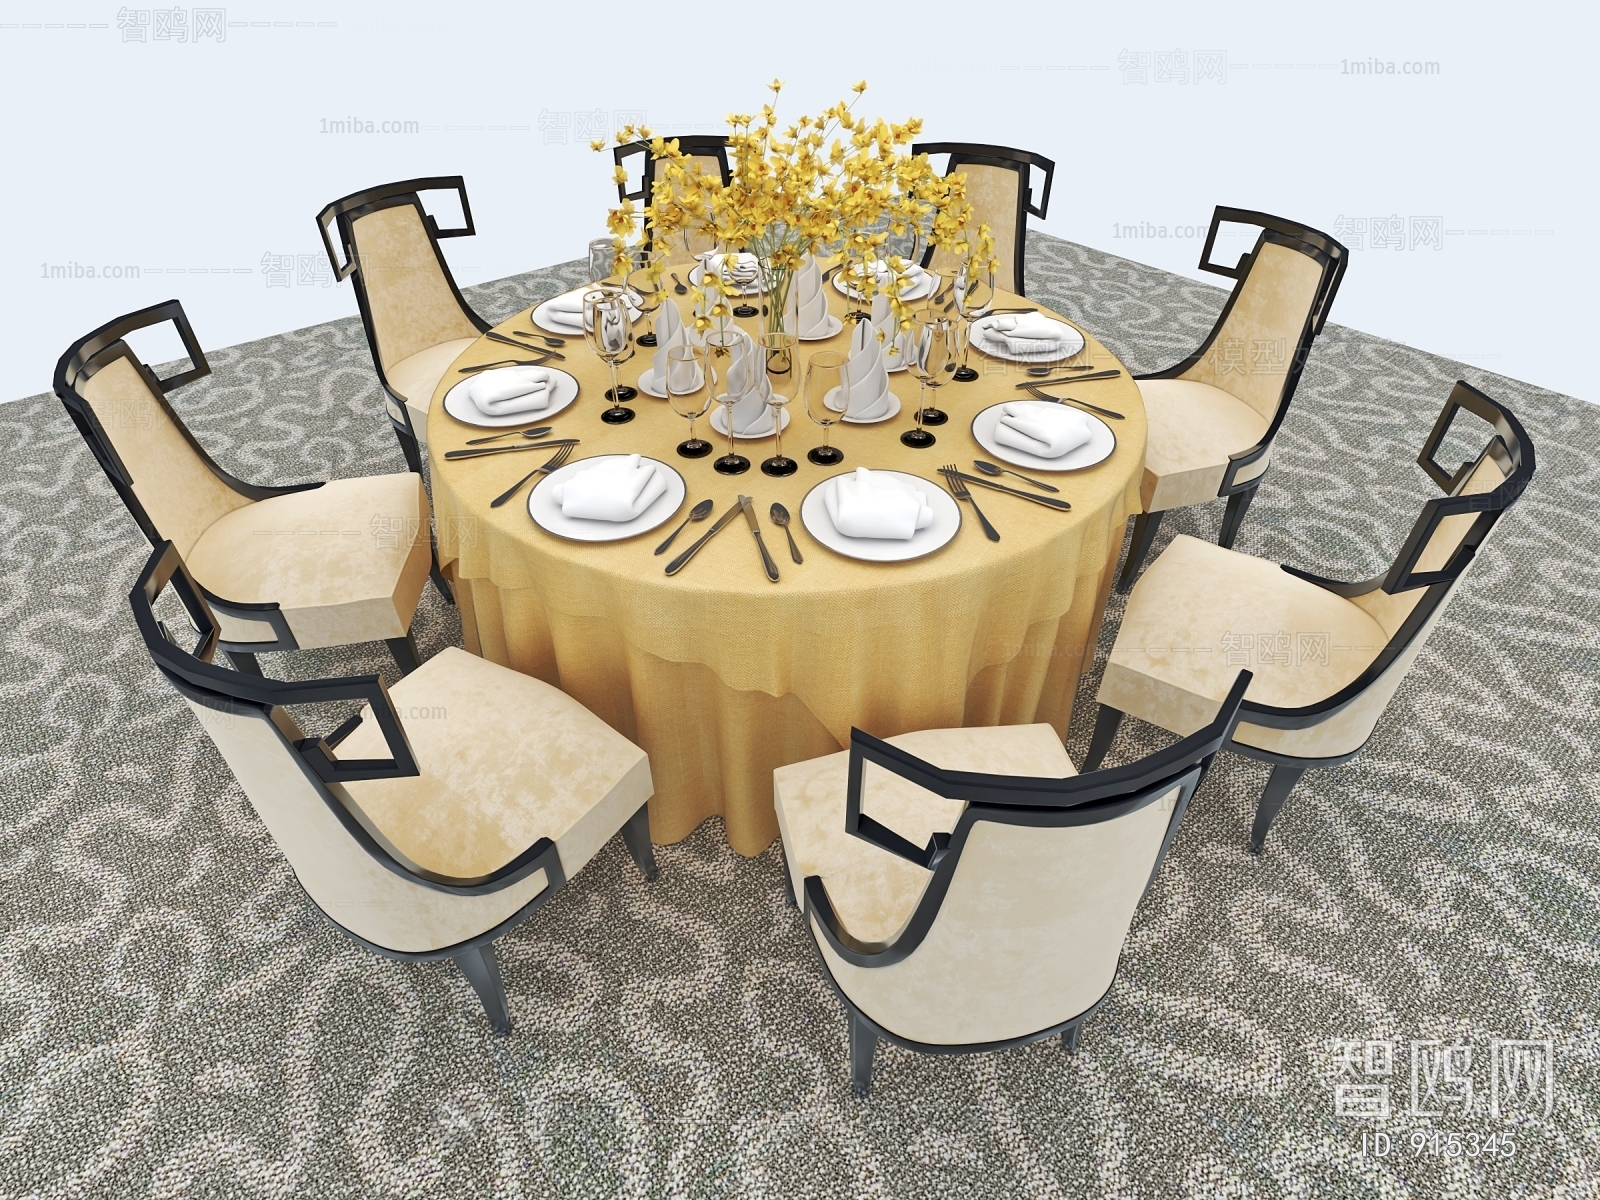 Simple European Style Dining Table And Chairs